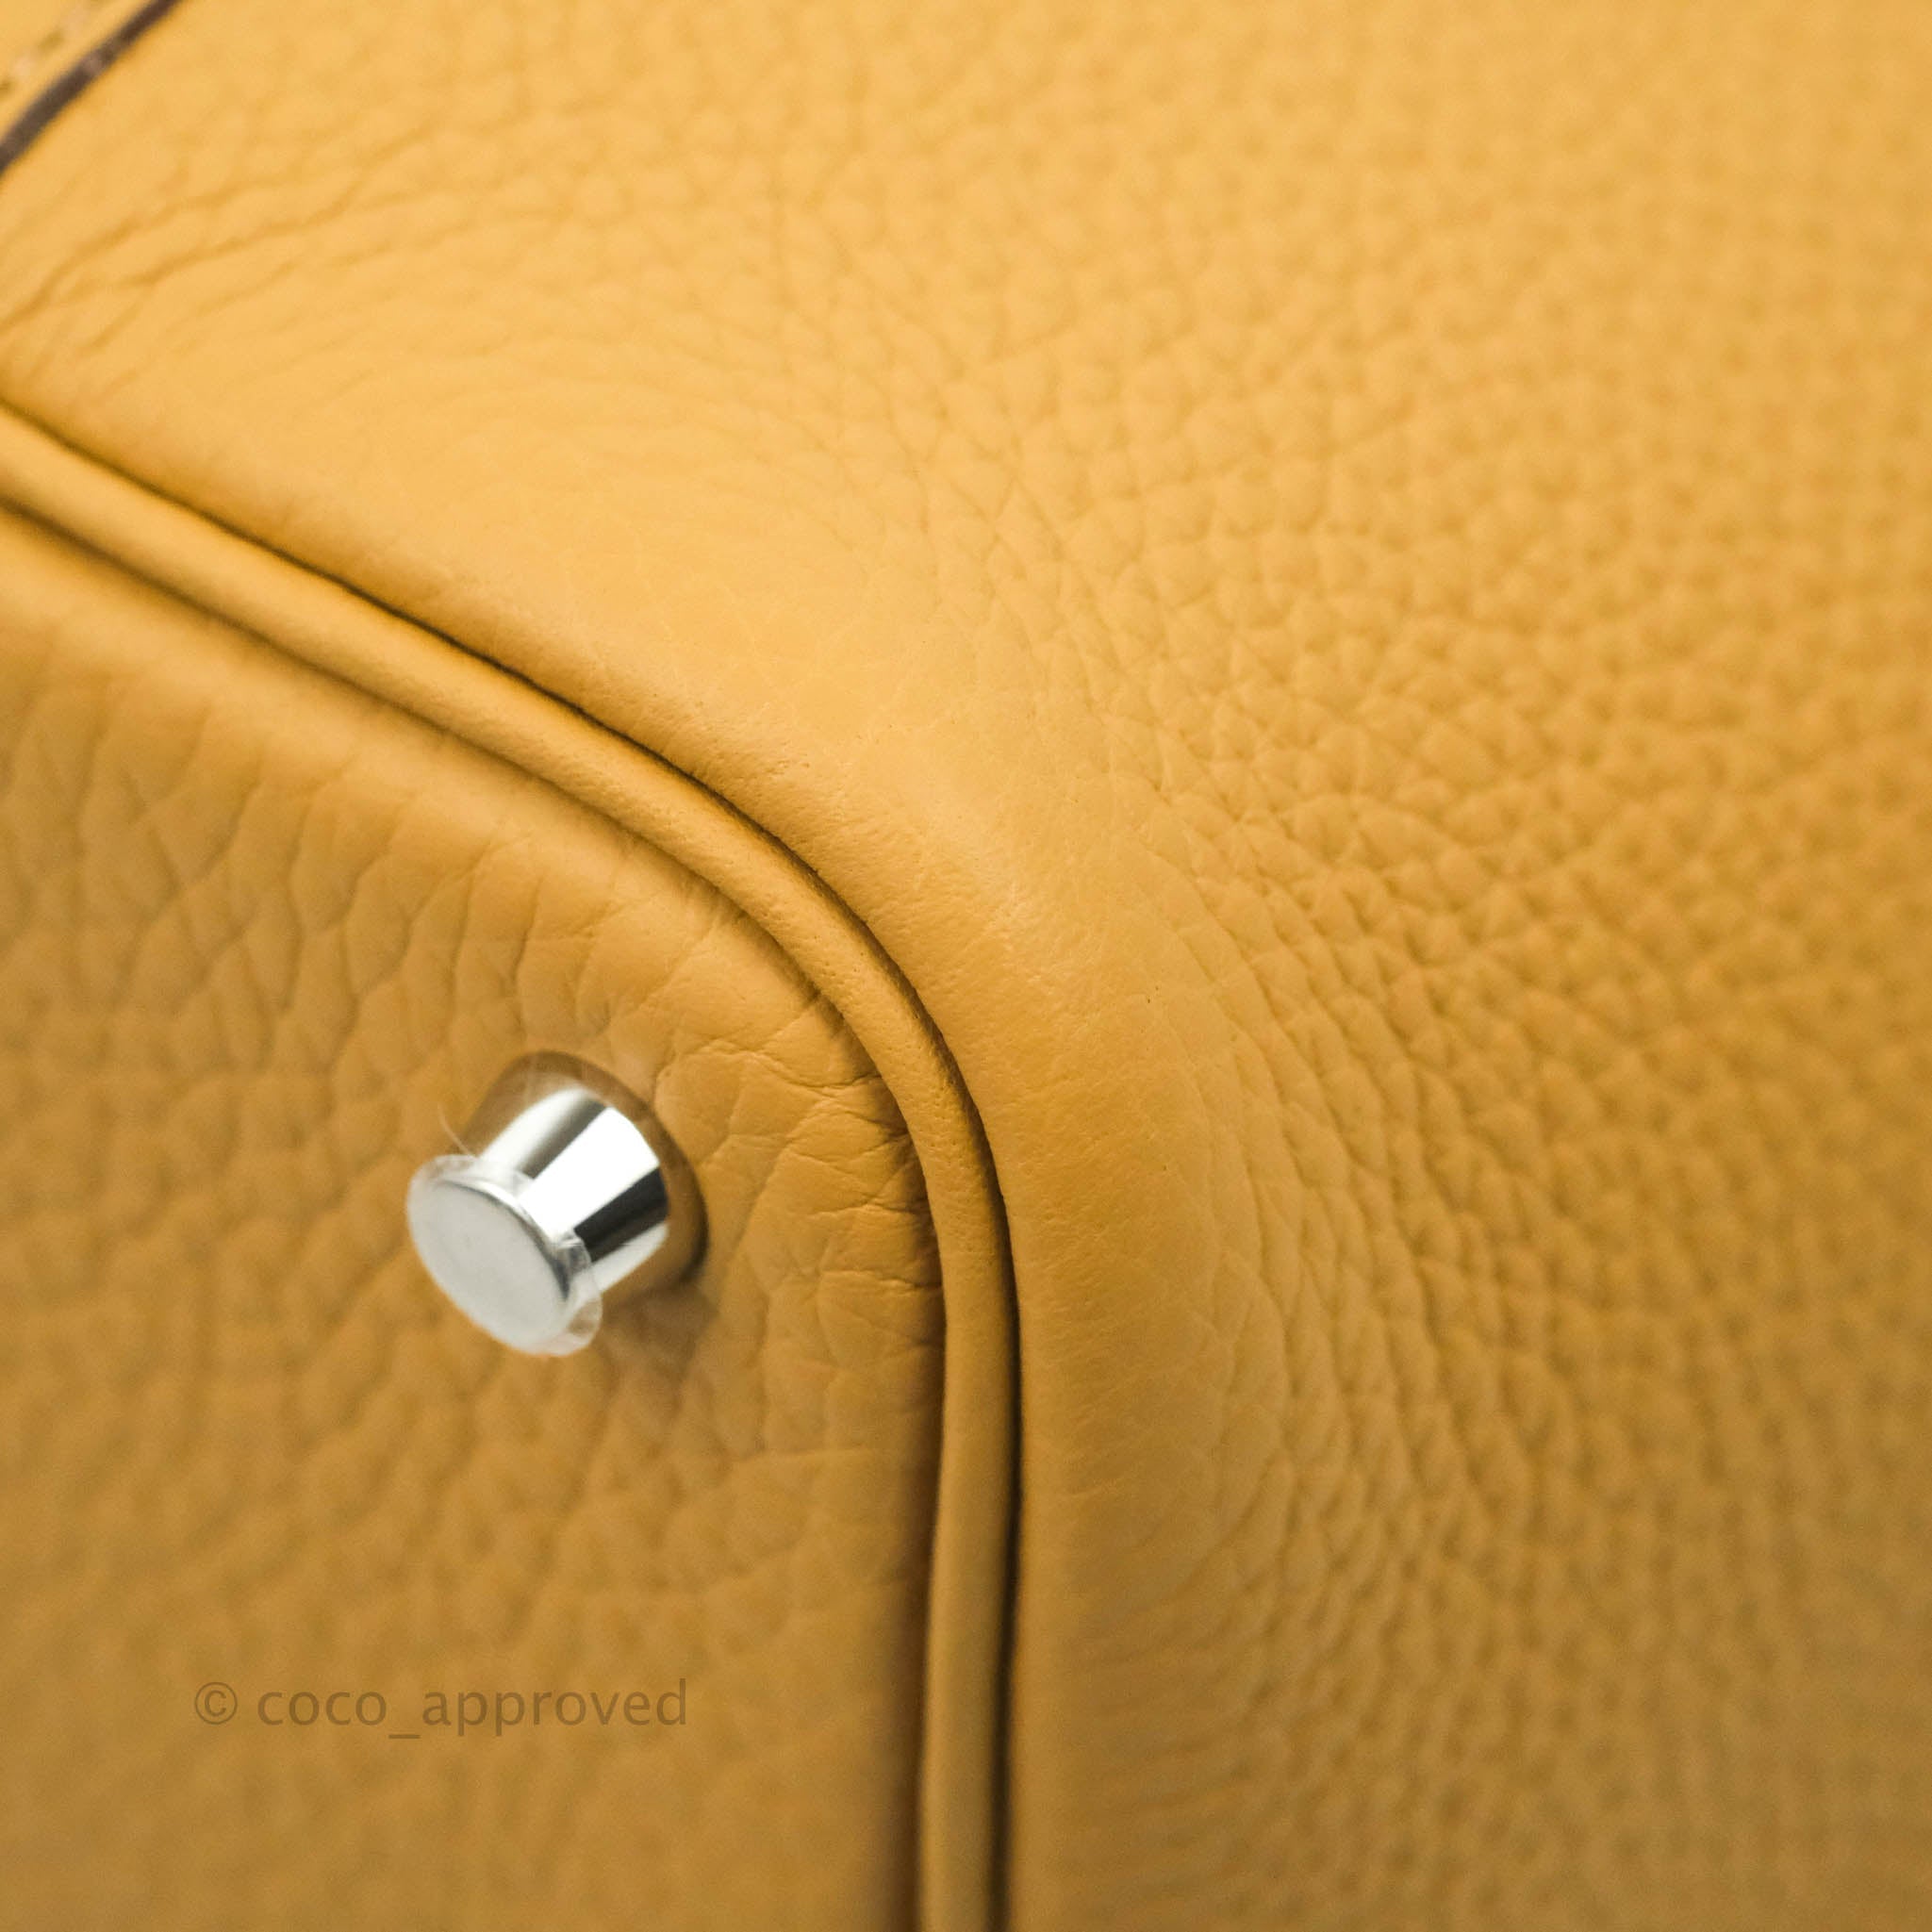 Hermes Picotin Lock 18 Biscuit Clemence Palladium Hardware – Madison Avenue  Couture